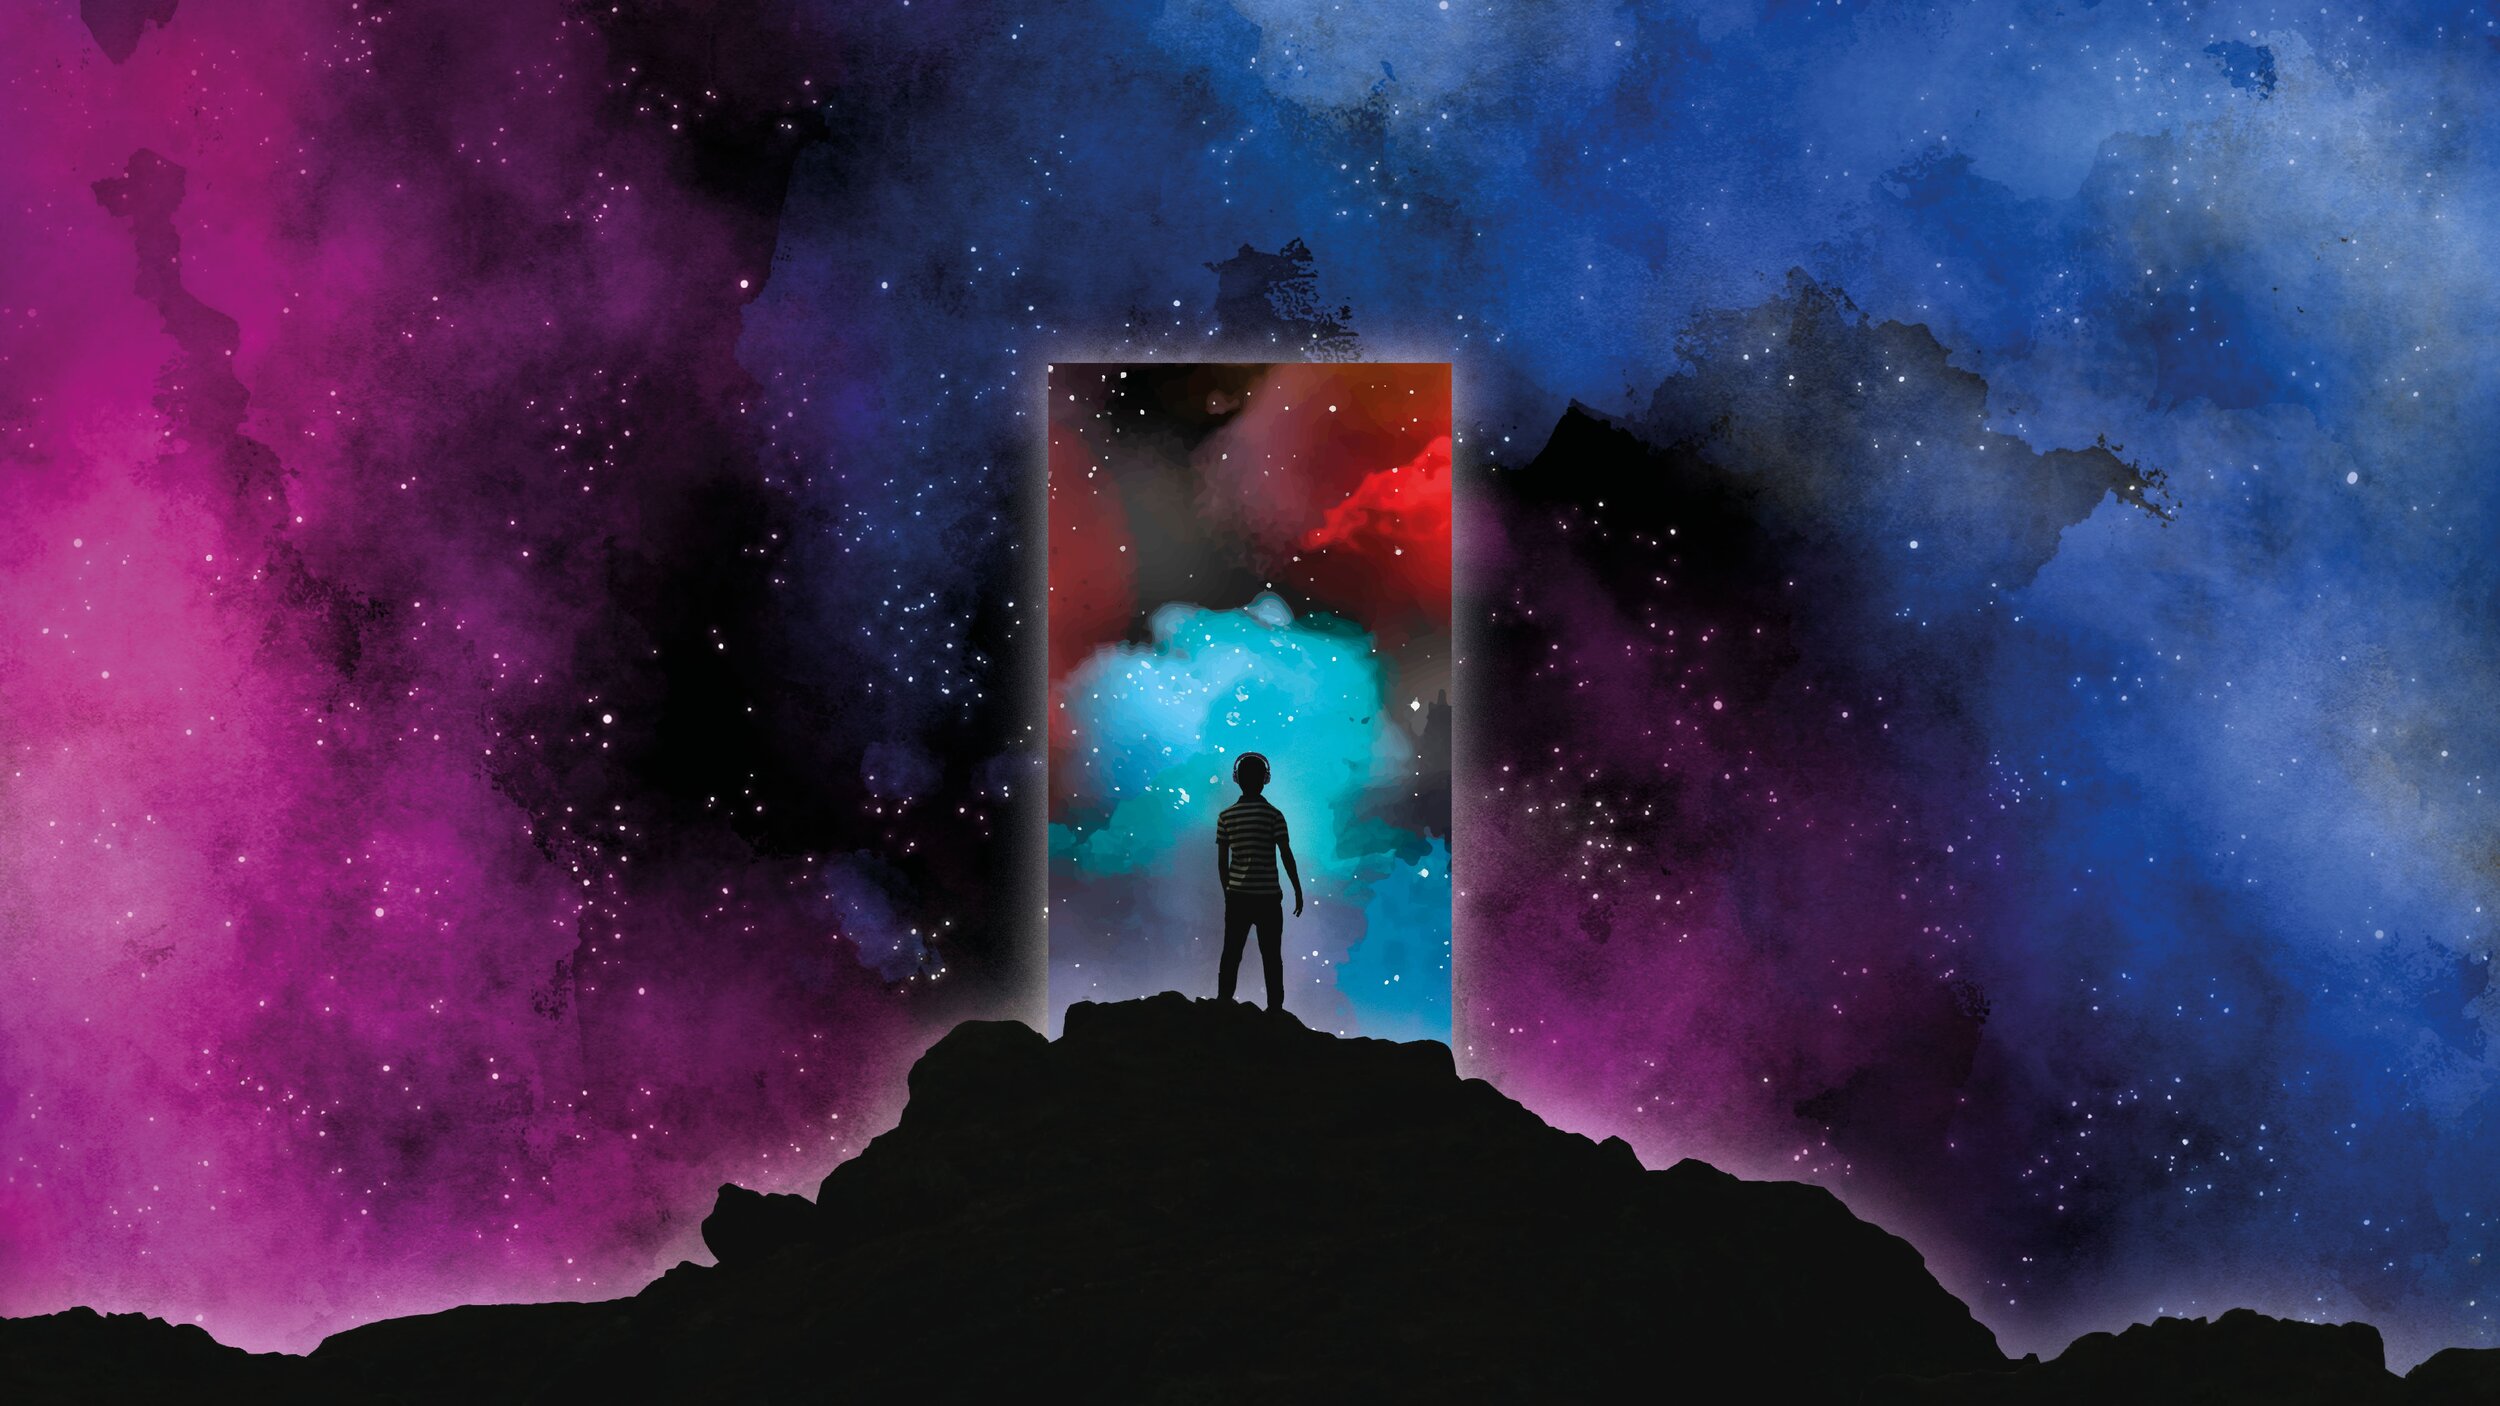 The back of a young person standing upon a rock. The horizon is a sky of colourful clouds. Before them is a rectangular shape - the monolith. Within that we see more clouds in more dynamic colours.